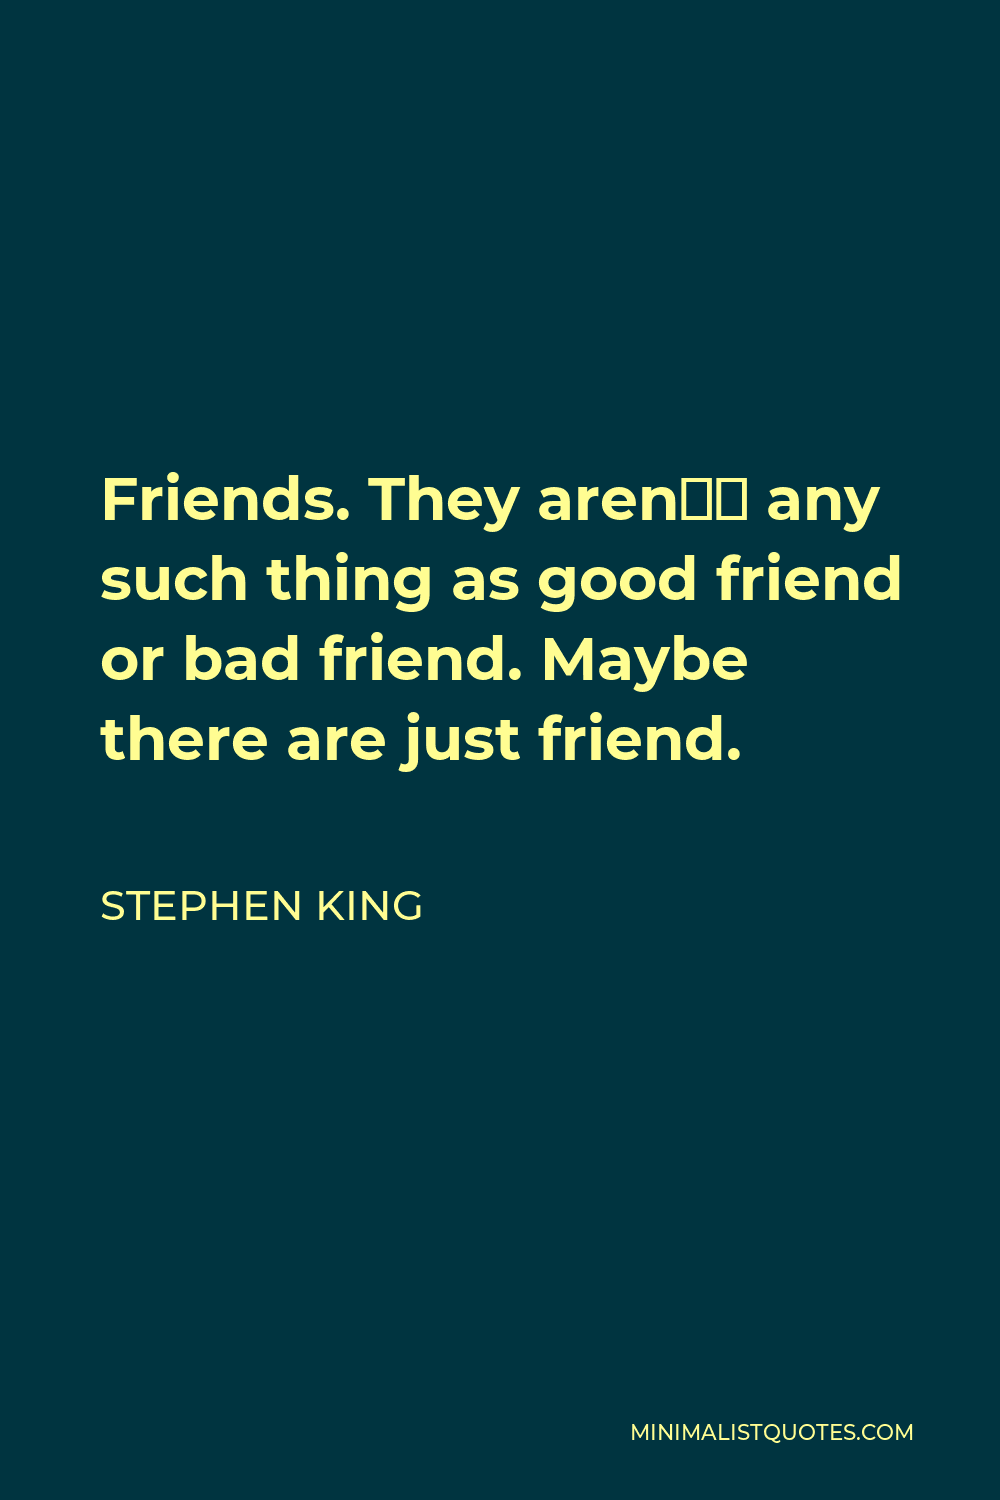 Stephen King Quote - Friends. They aren’t any such thing as good friend or bad friend. Maybe there are just friend.